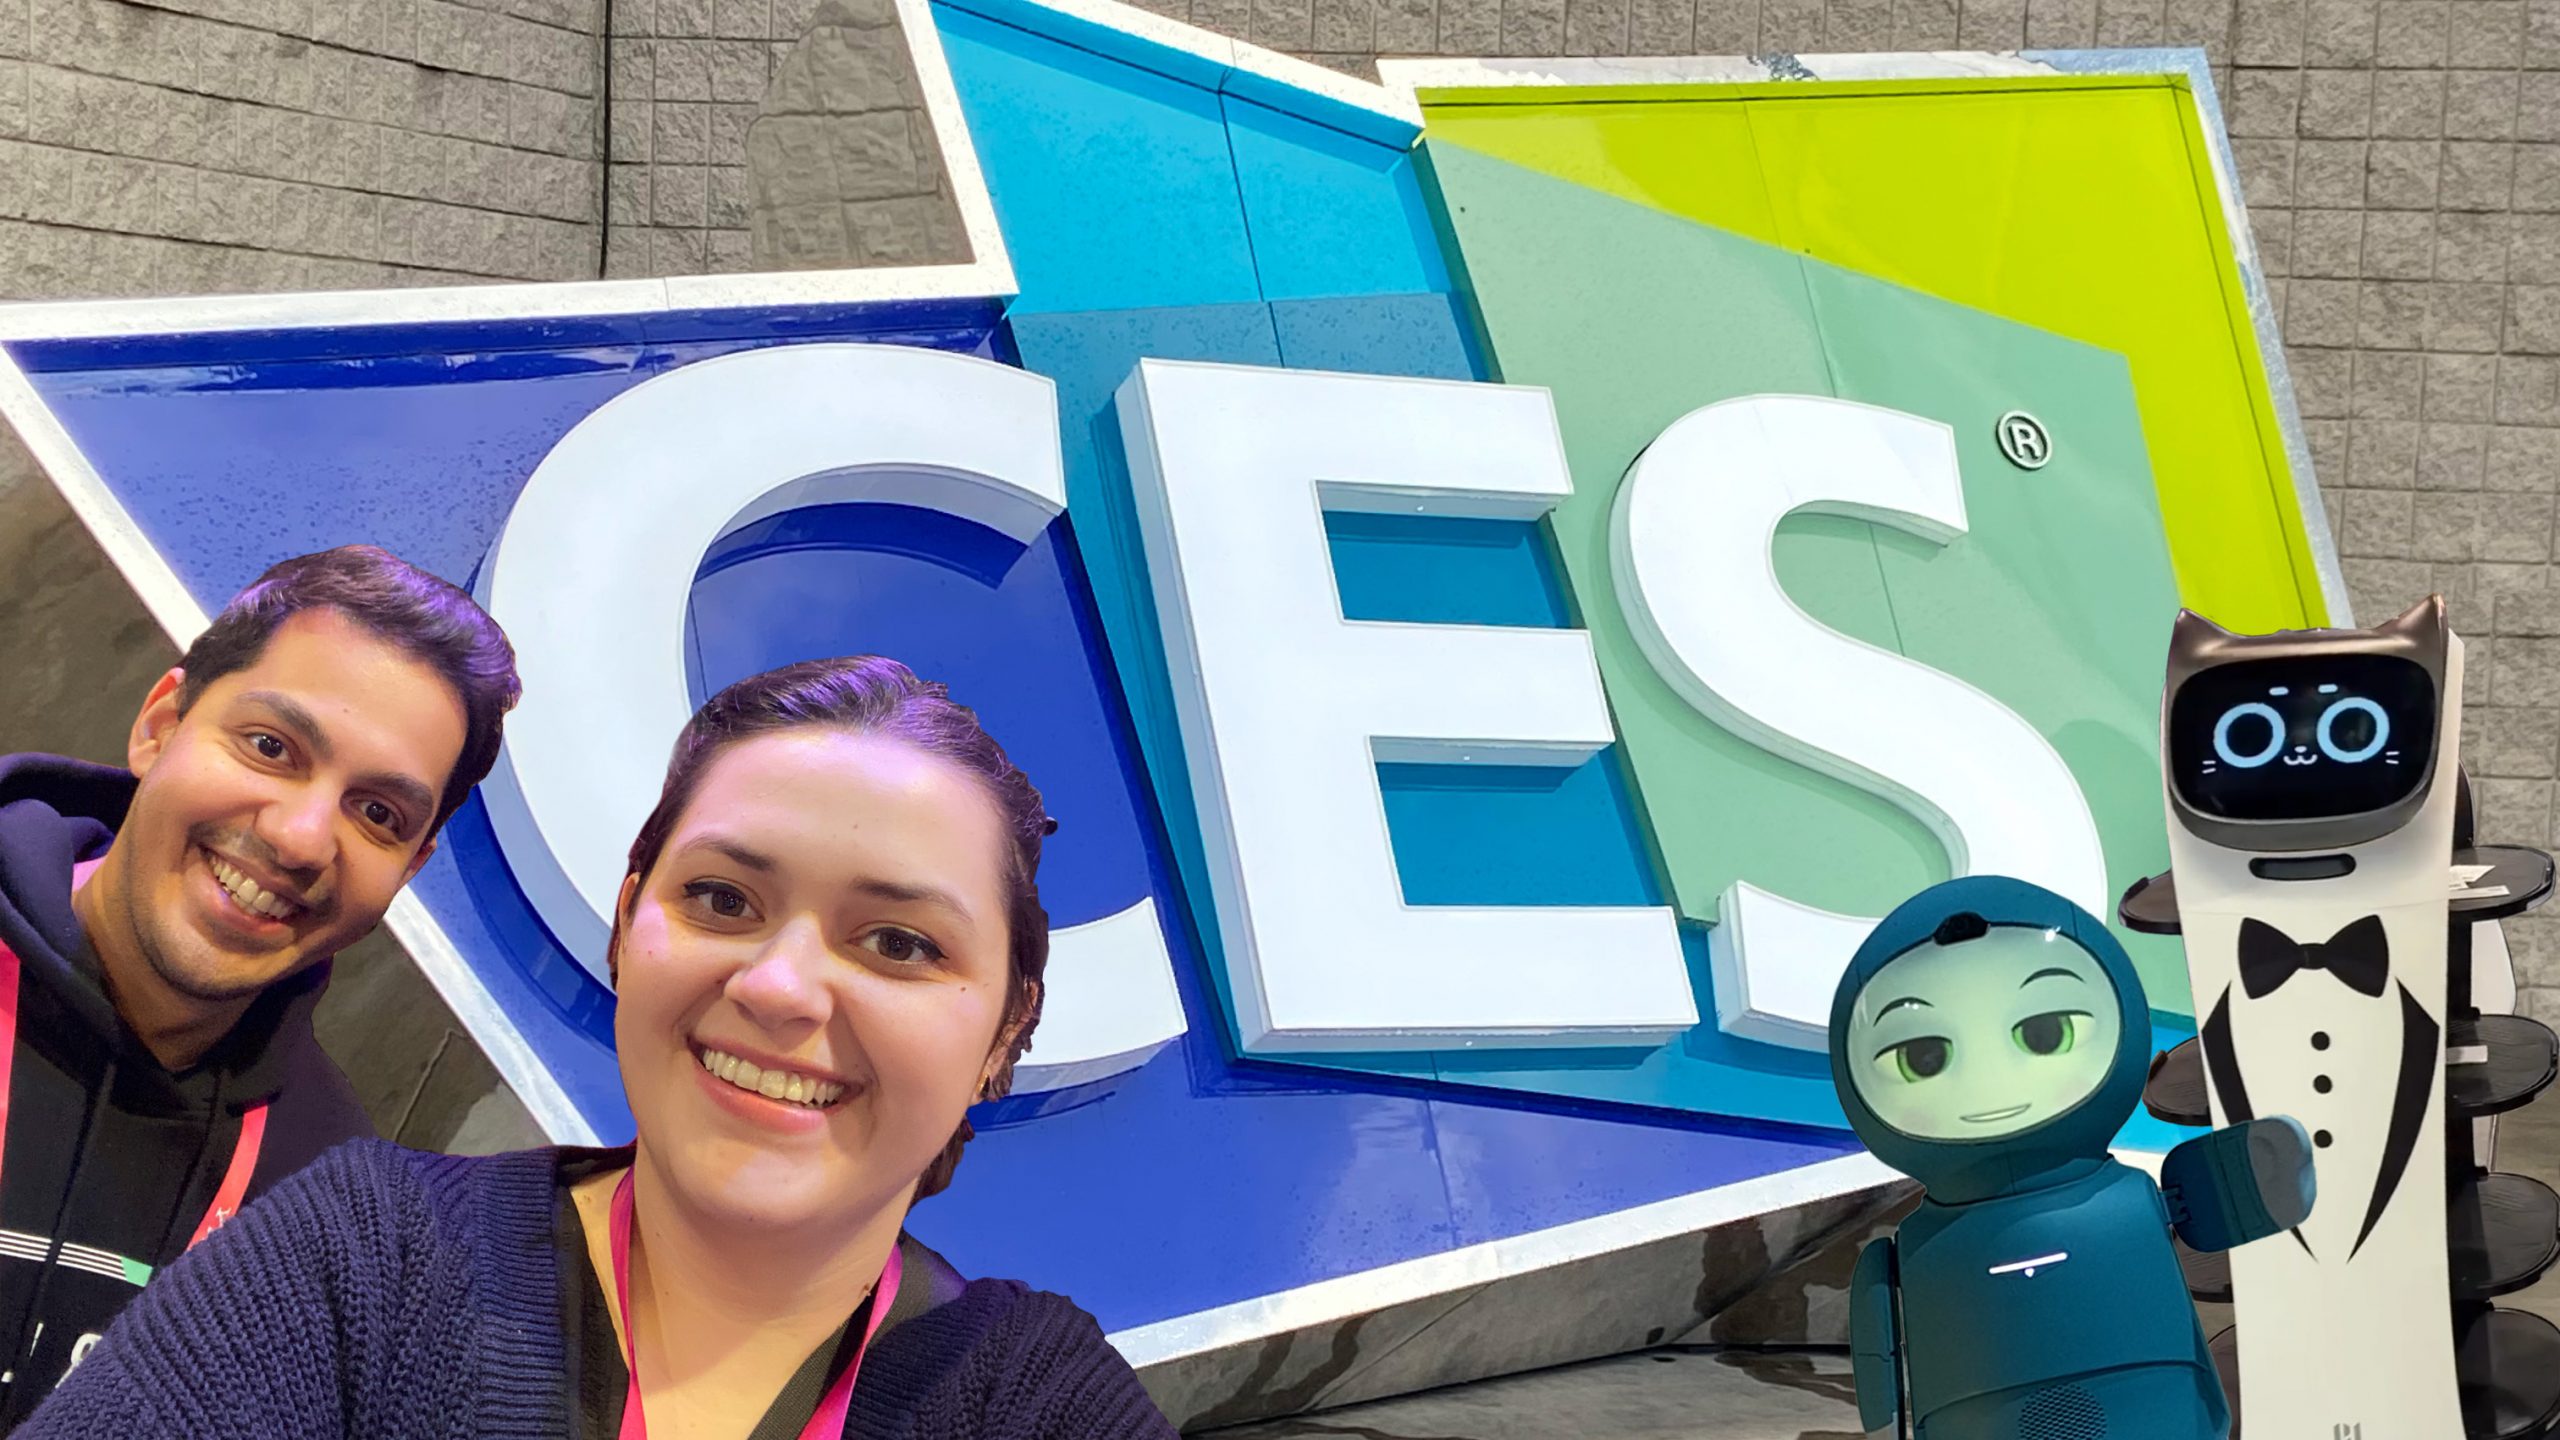 Abhi Shah, Raiza Newberry-Quiroz, Moxie the robot and a serving cat robot in front of a CES board.